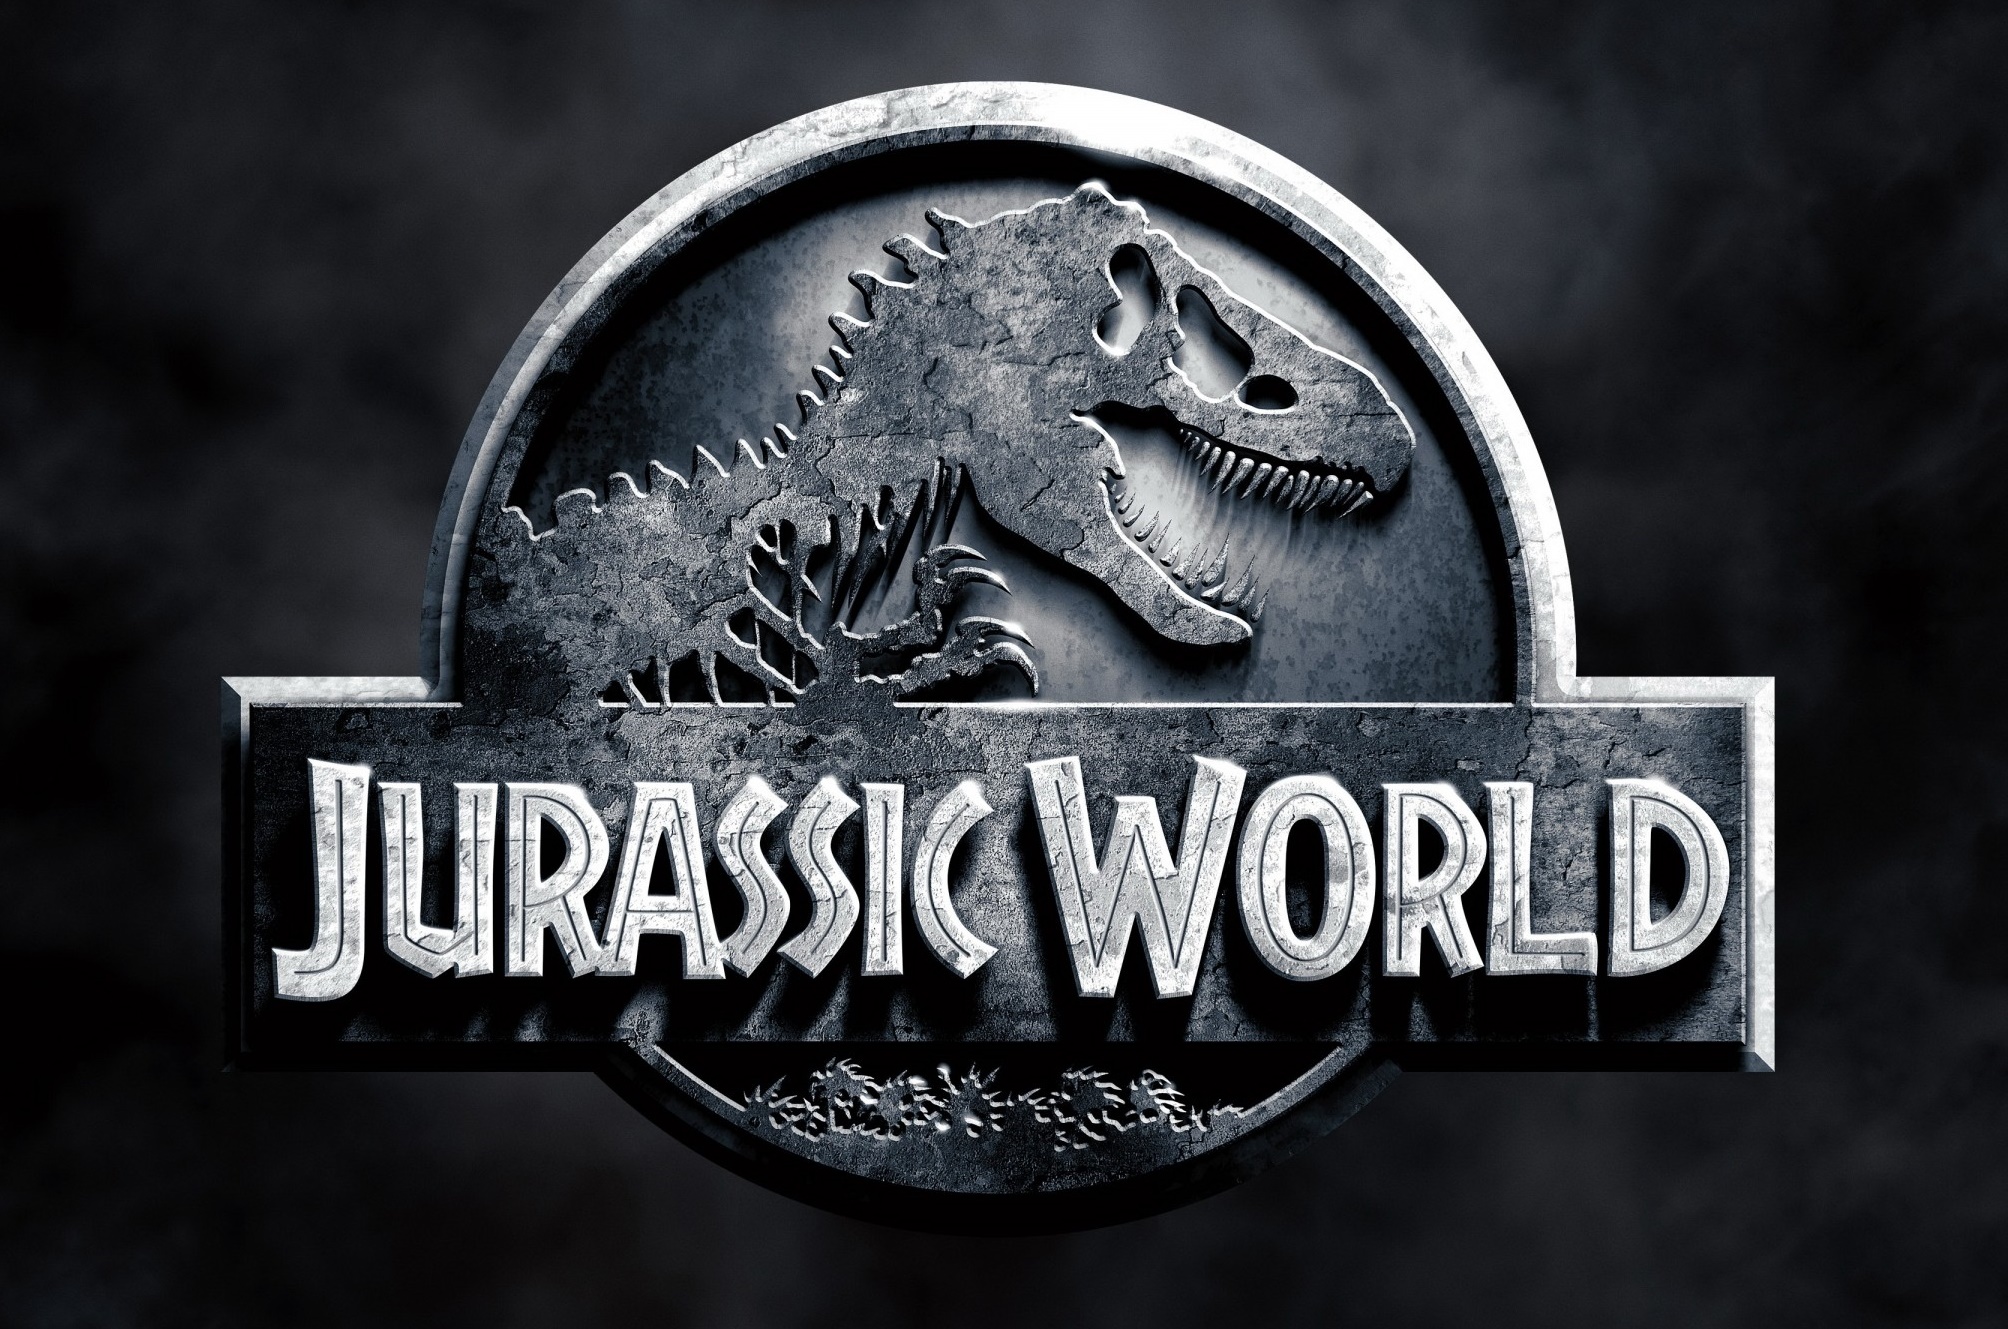 Just when you thought a T-Rex was deadly enough, here comes 'Jurassic World'